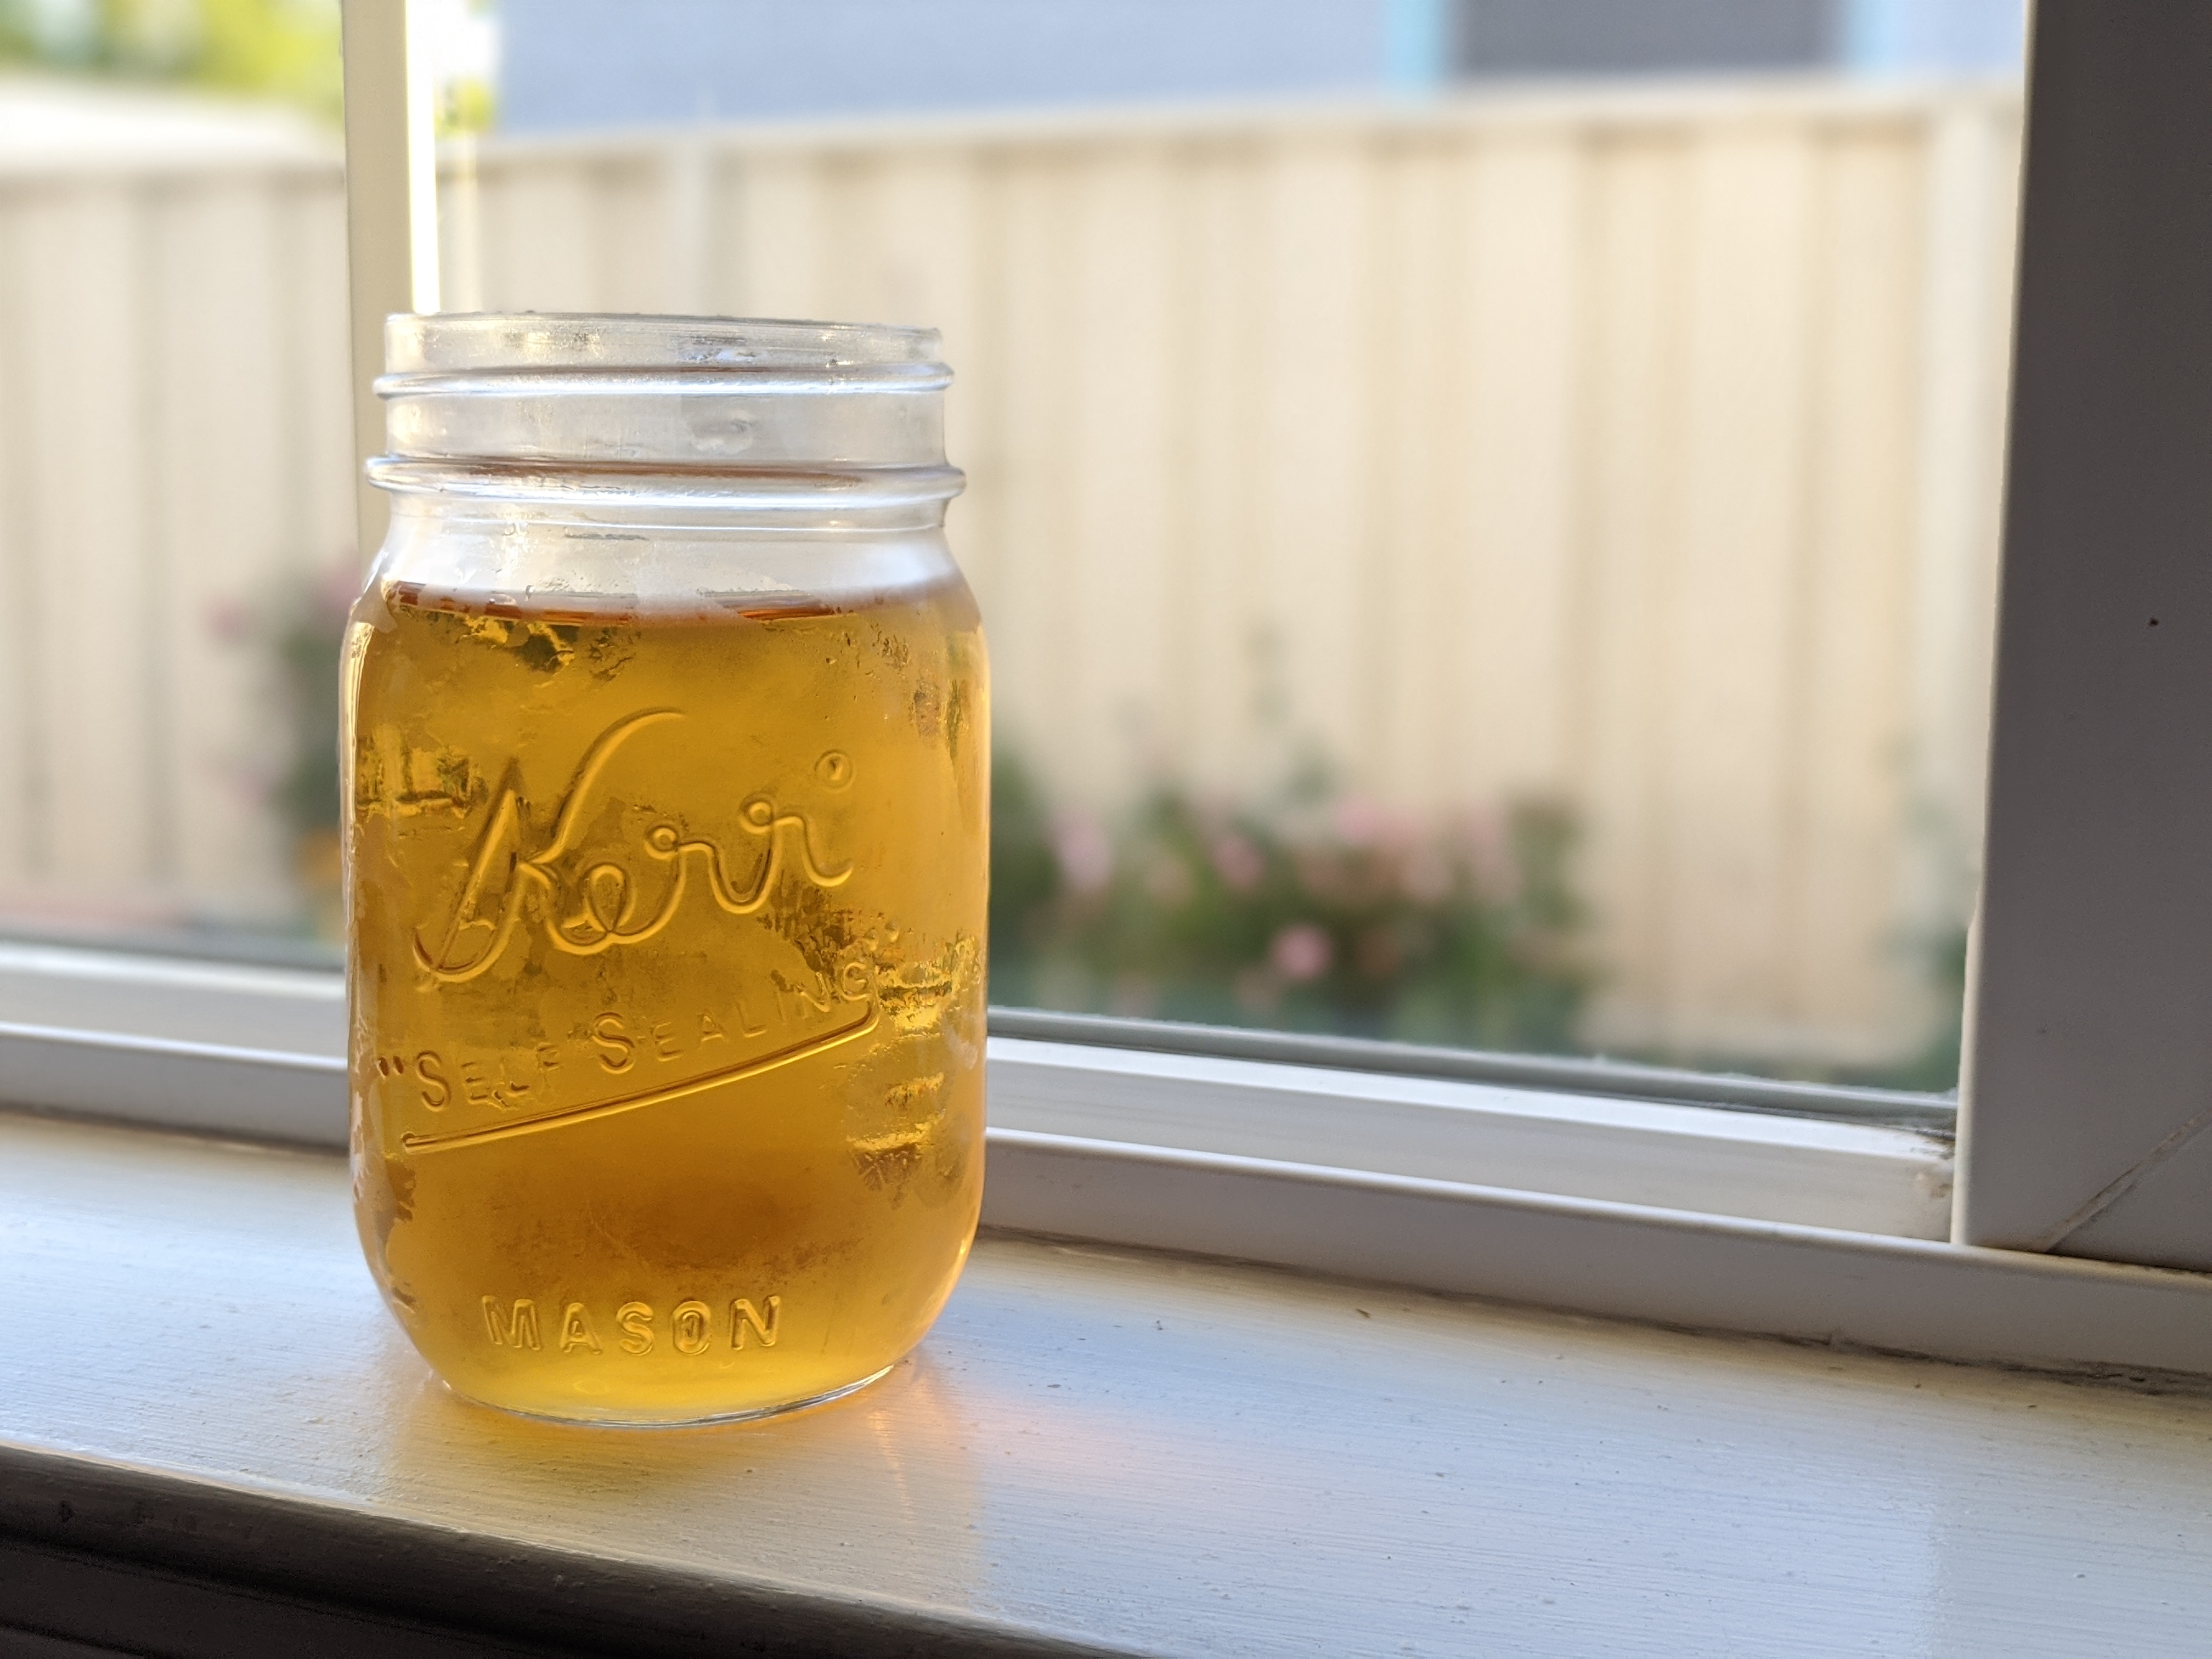 How to Steep Cold Brew Tea